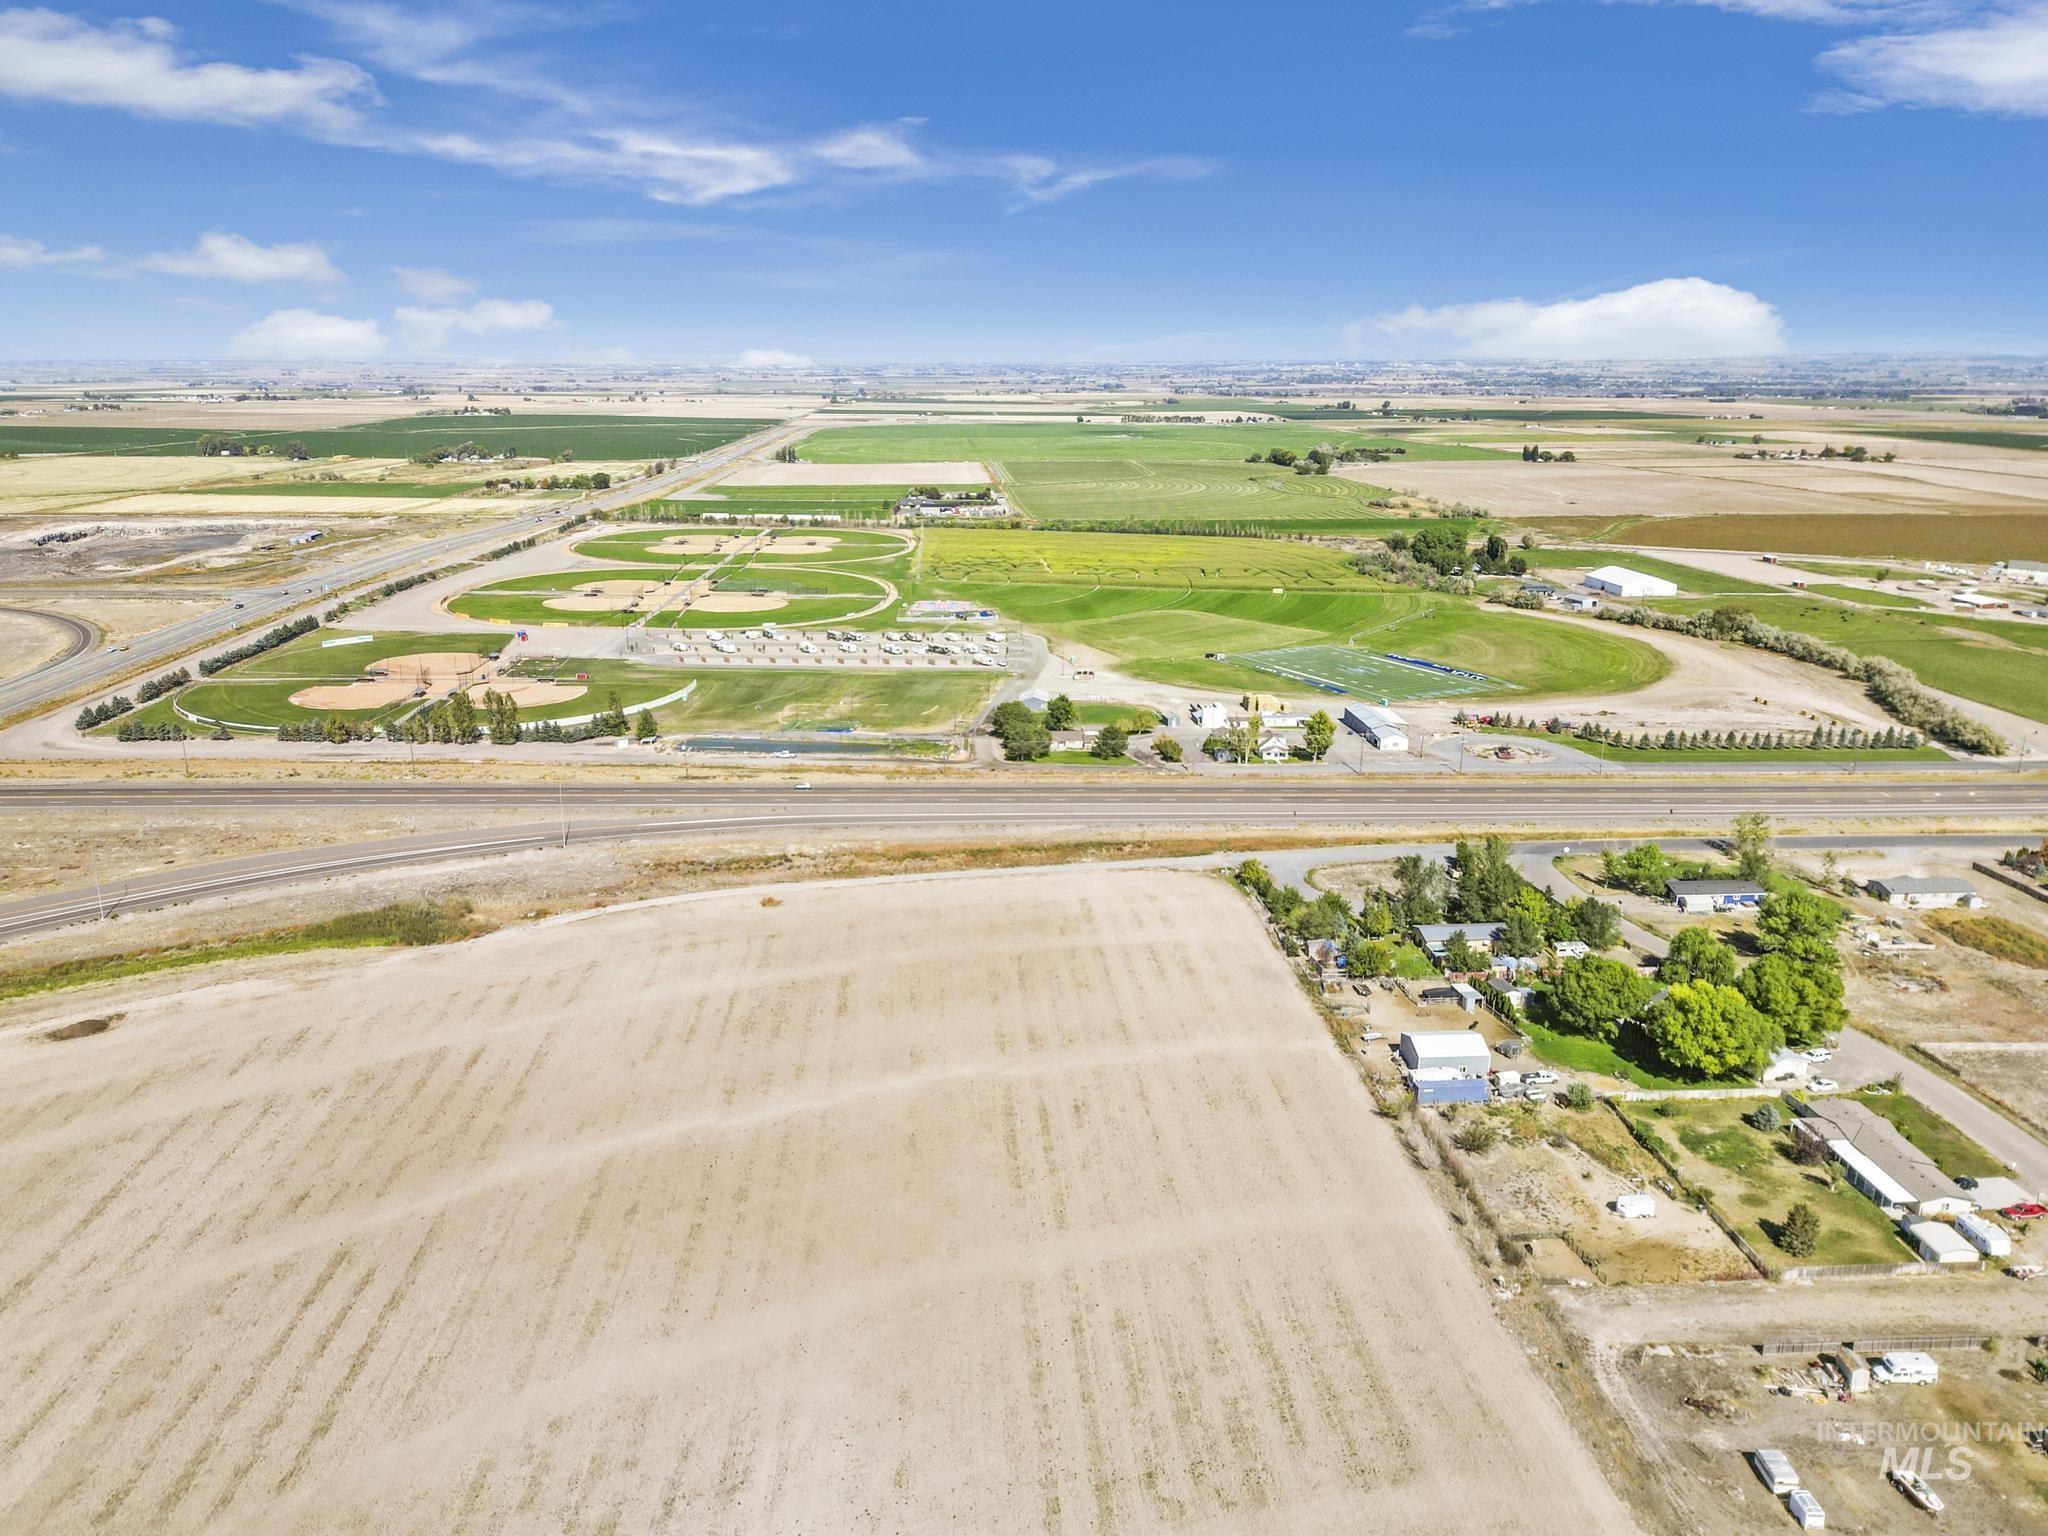 21234 Hwy 30 Filer ID 83328, Filer, Idaho 83328, Business/Commercial For Sale, Price $9,999,999,MLS 98891300